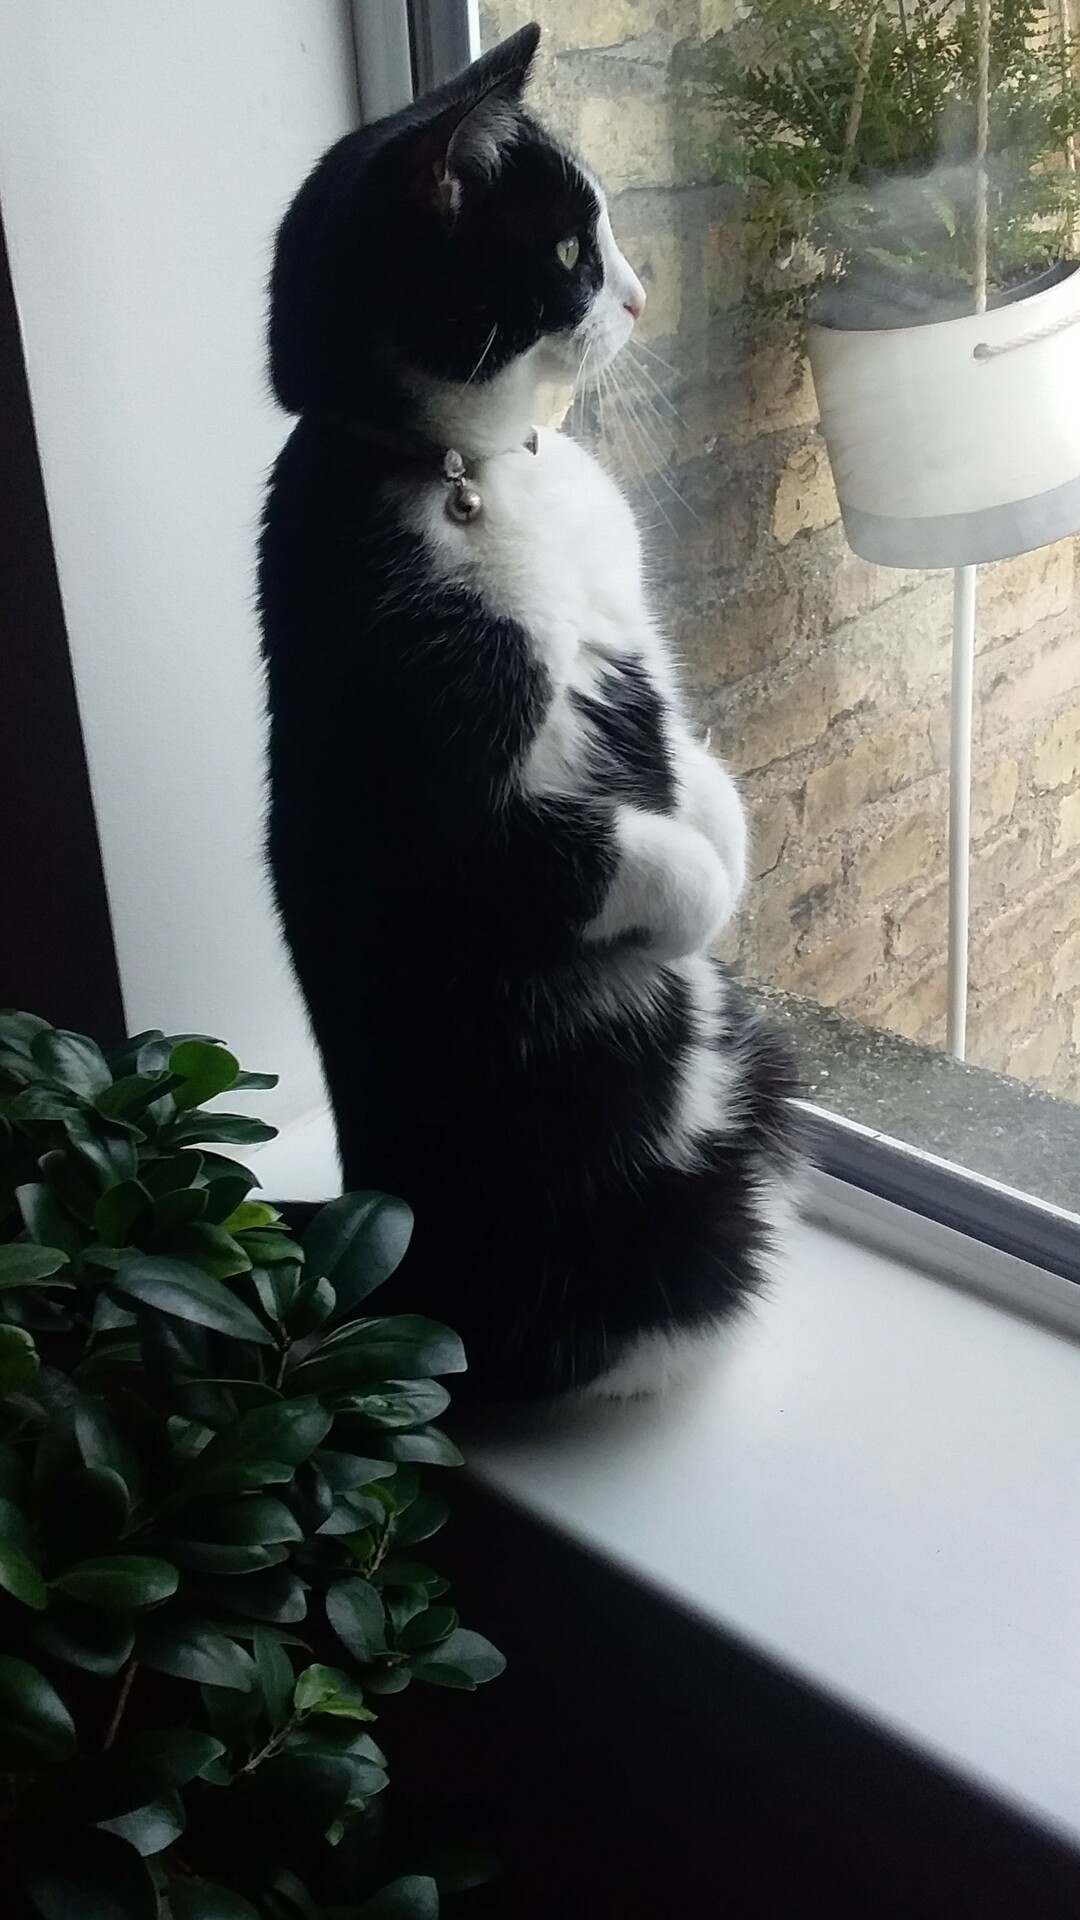 Black and white cat standing on their hind legs by a window